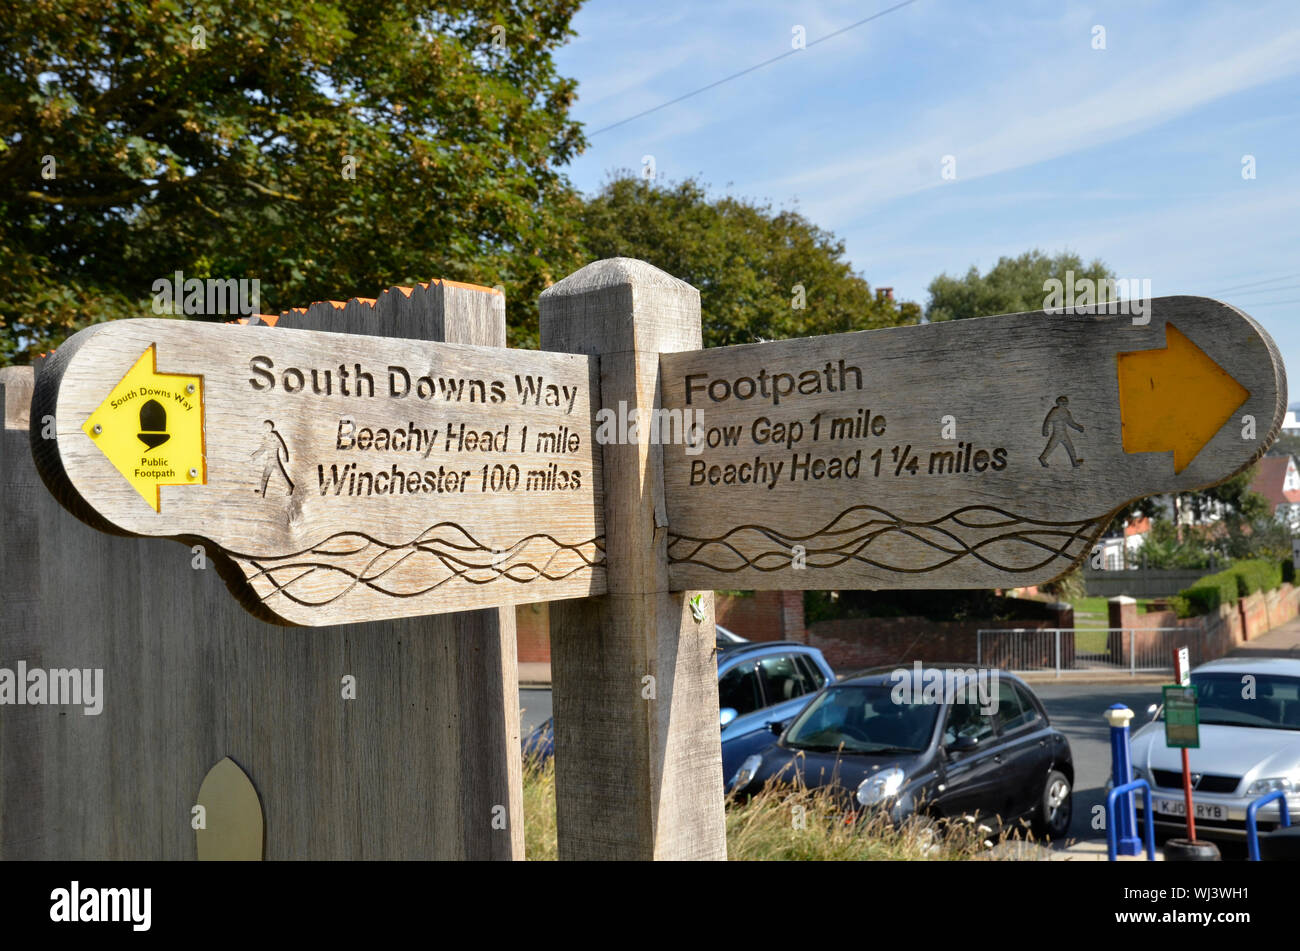 A sign at the beginning of the South Downs Way near Eastbourne in East Sussex. The footpaths run for 100 miles across national parks to Winchester. Stock Photo